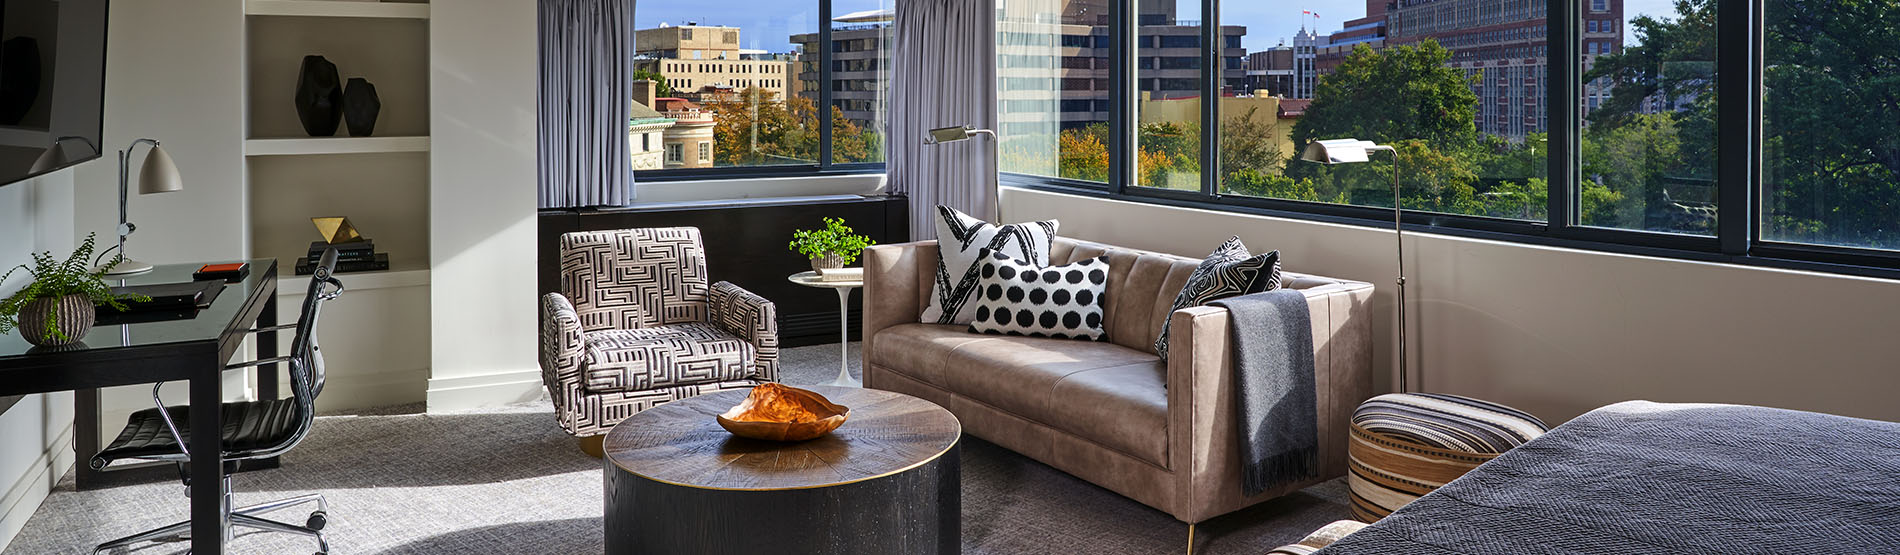 Suite living room with large windows and view of city